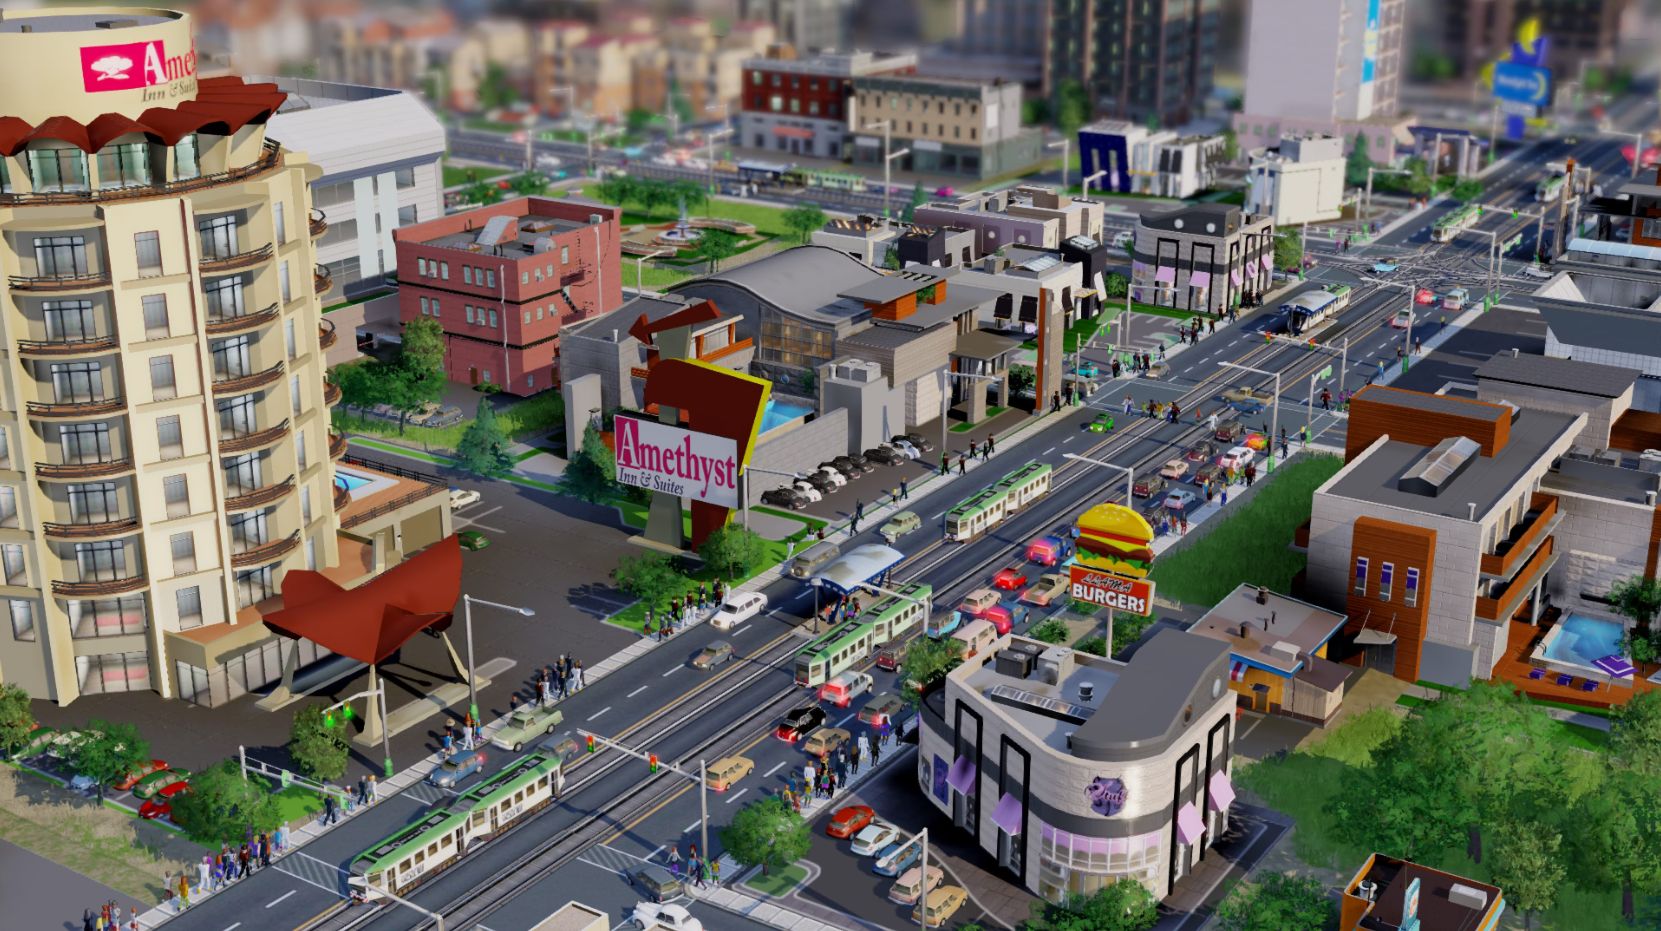 SimCity developers say 2013 launch was ‘heartbreaking’